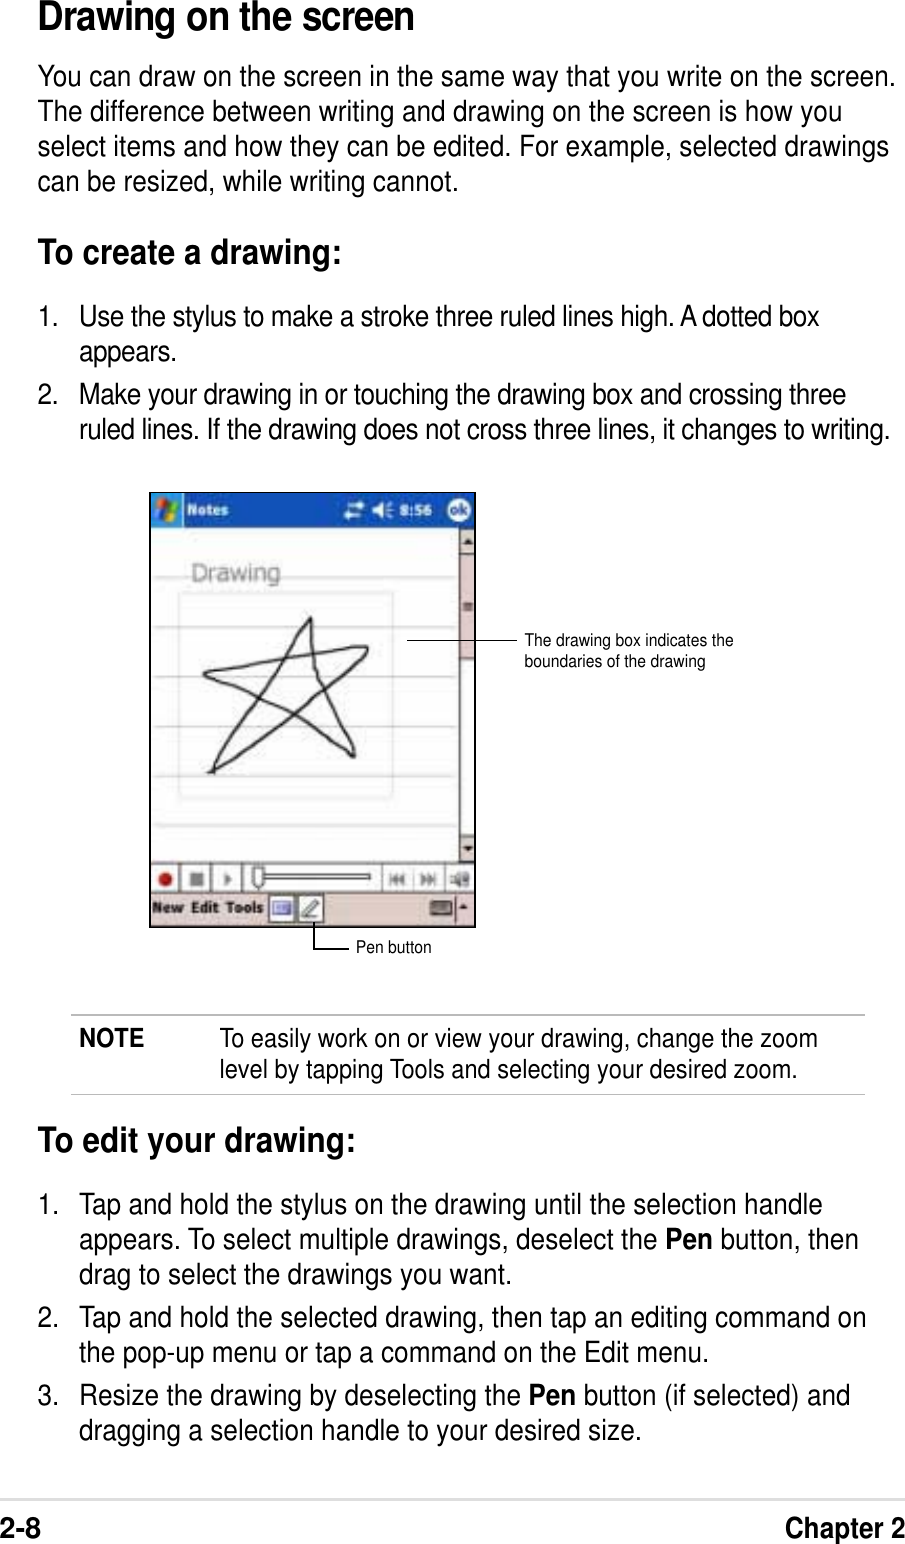 2-8Chapter 2Drawing on the screenYou can draw on the screen in the same way that you write on the screen.The difference between writing and drawing on the screen is how youselect items and how they can be edited. For example, selected drawingscan be resized, while writing cannot.To create a drawing:1. Use the stylus to make a stroke three ruled lines high. A dotted boxappears.2. Make your drawing in or touching the drawing box and crossing threeruled lines. If the drawing does not cross three lines, it changes to writing.NOTE To easily work on or view your drawing, change the zoomlevel by tapping Tools and selecting your desired zoom.To edit your drawing:1. Tap and hold the stylus on the drawing until the selection handleappears. To select multiple drawings, deselect the Pen button, thendrag to select the drawings you want.2. Tap and hold the selected drawing, then tap an editing command onthe pop-up menu or tap a command on the Edit menu.3. Resize the drawing by deselecting the Pen button (if selected) anddragging a selection handle to your desired size.The drawing box indicates theboundaries of the drawingPen button